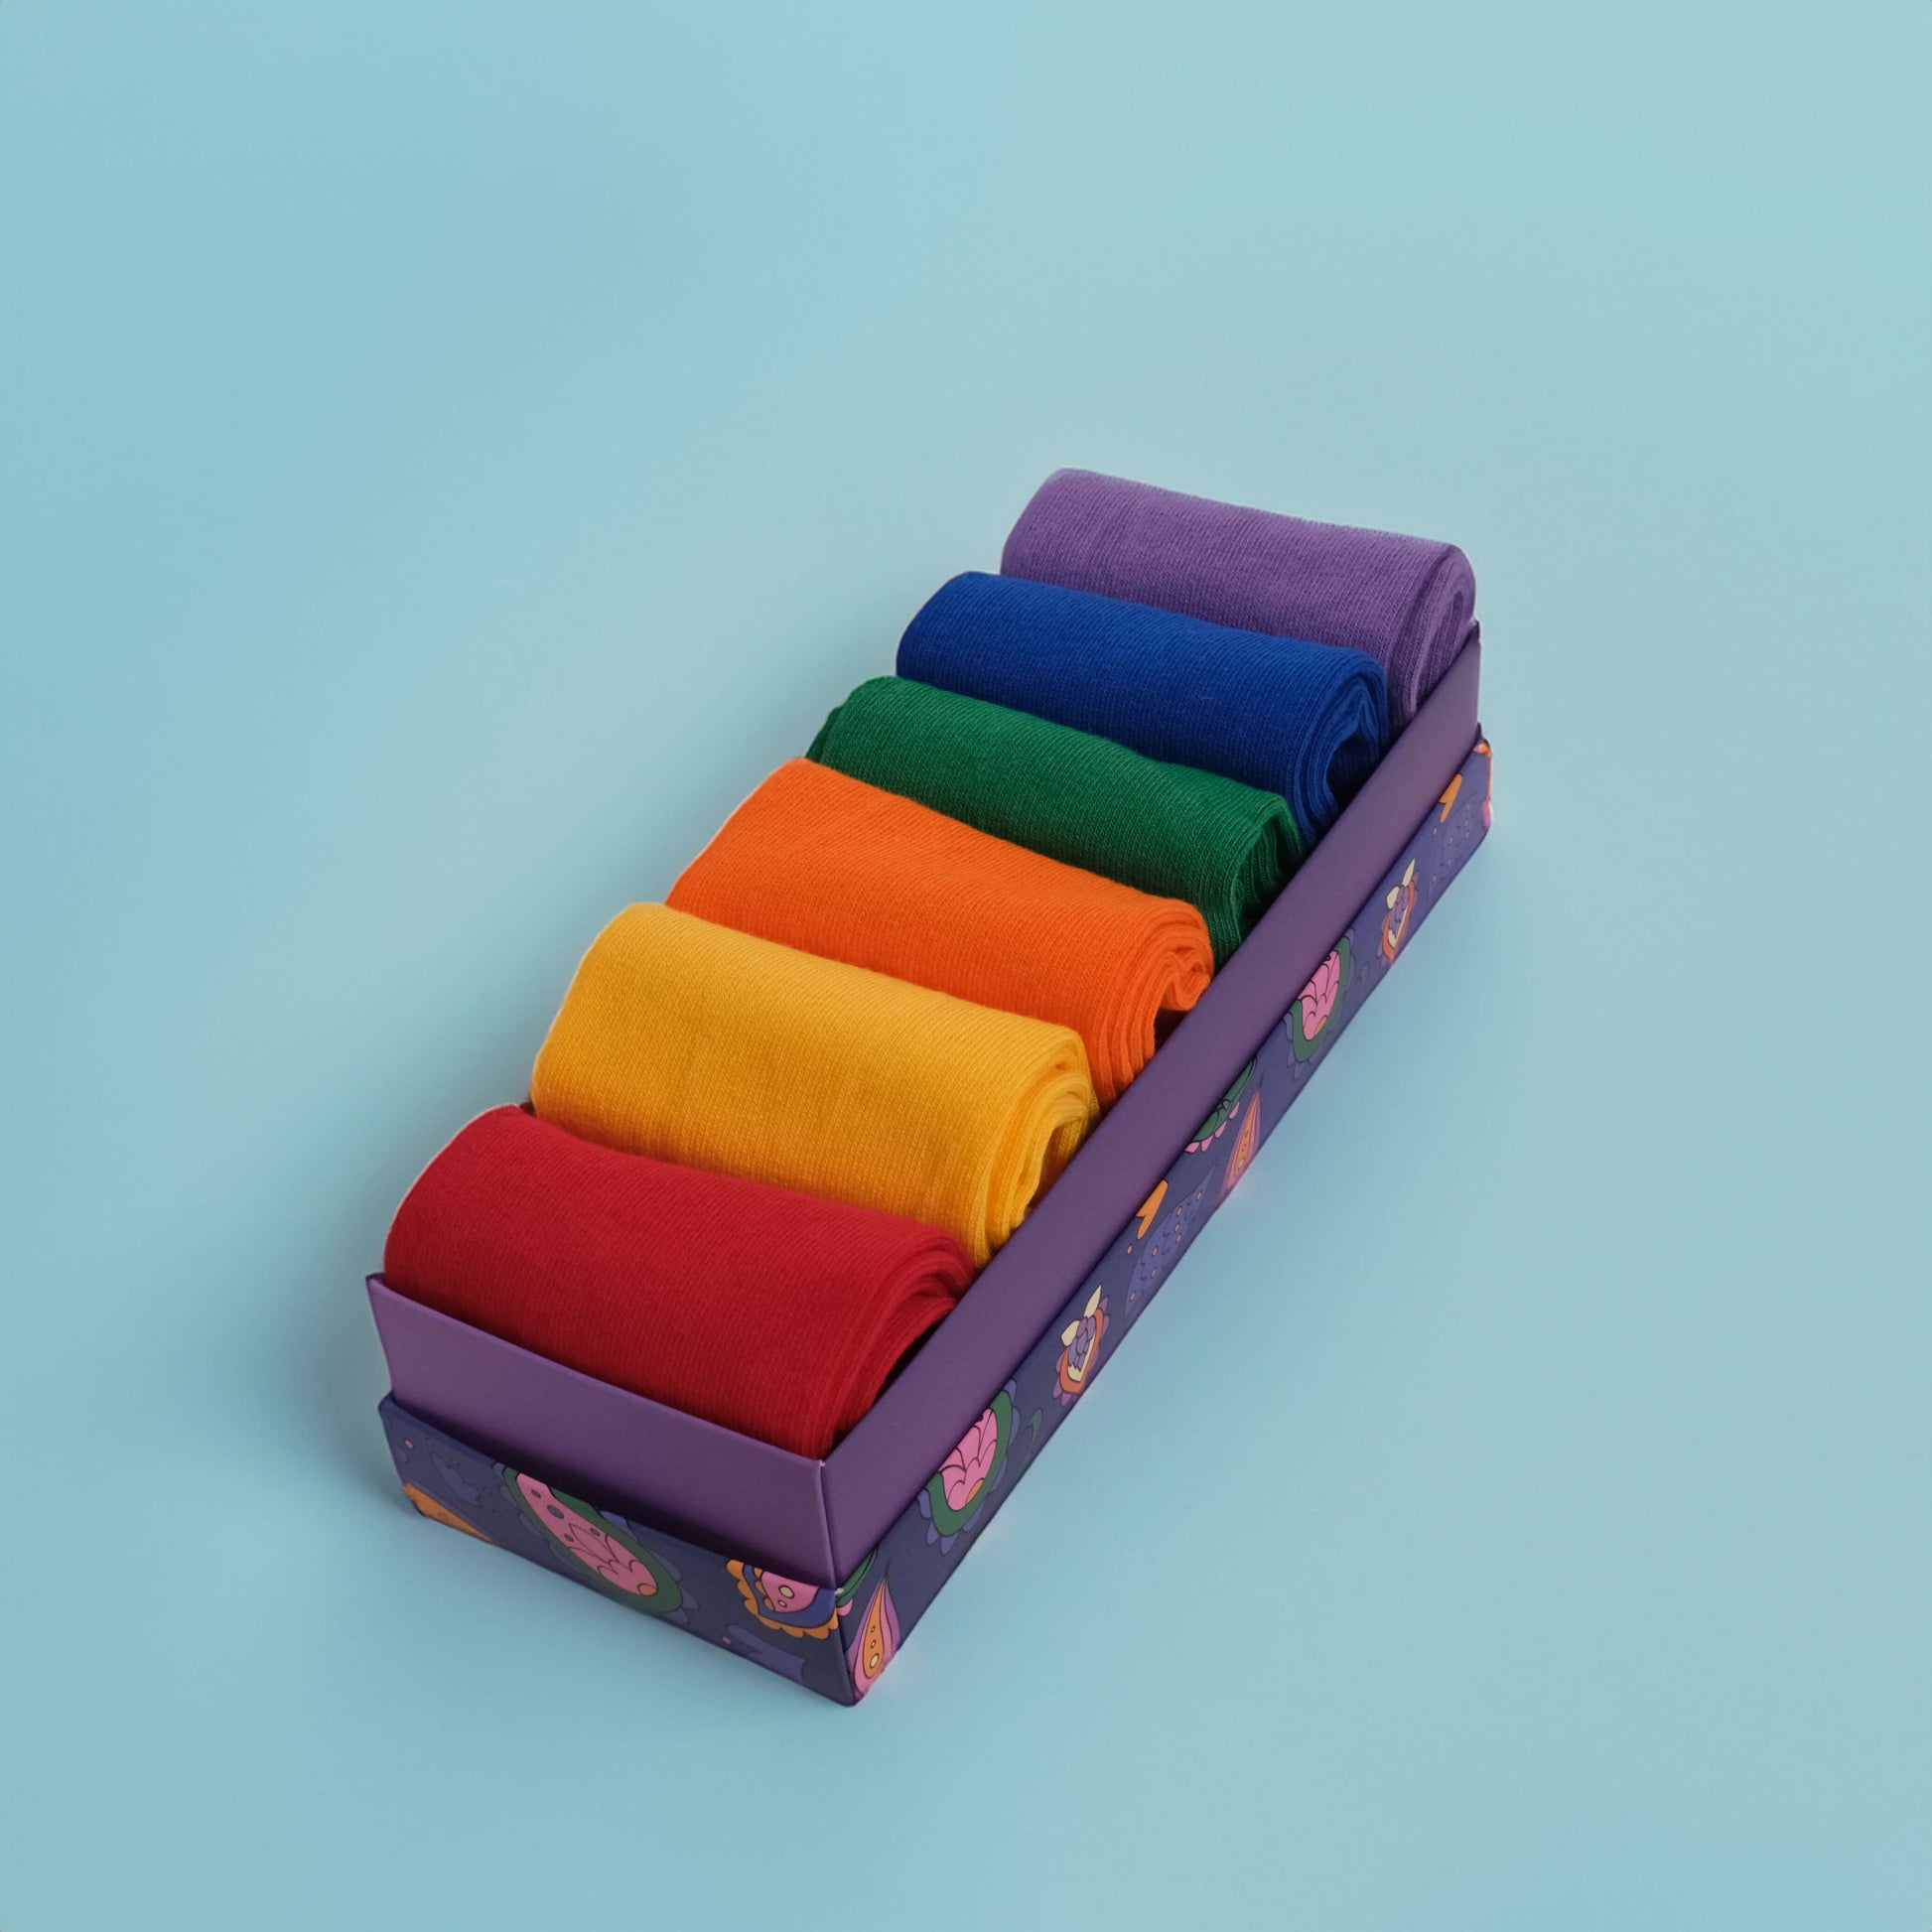 Assortment of six pairs of cotton socks featuring solid patterns in a spectrum of colors, including navy blue, red, green, yellow, purple, and pink.